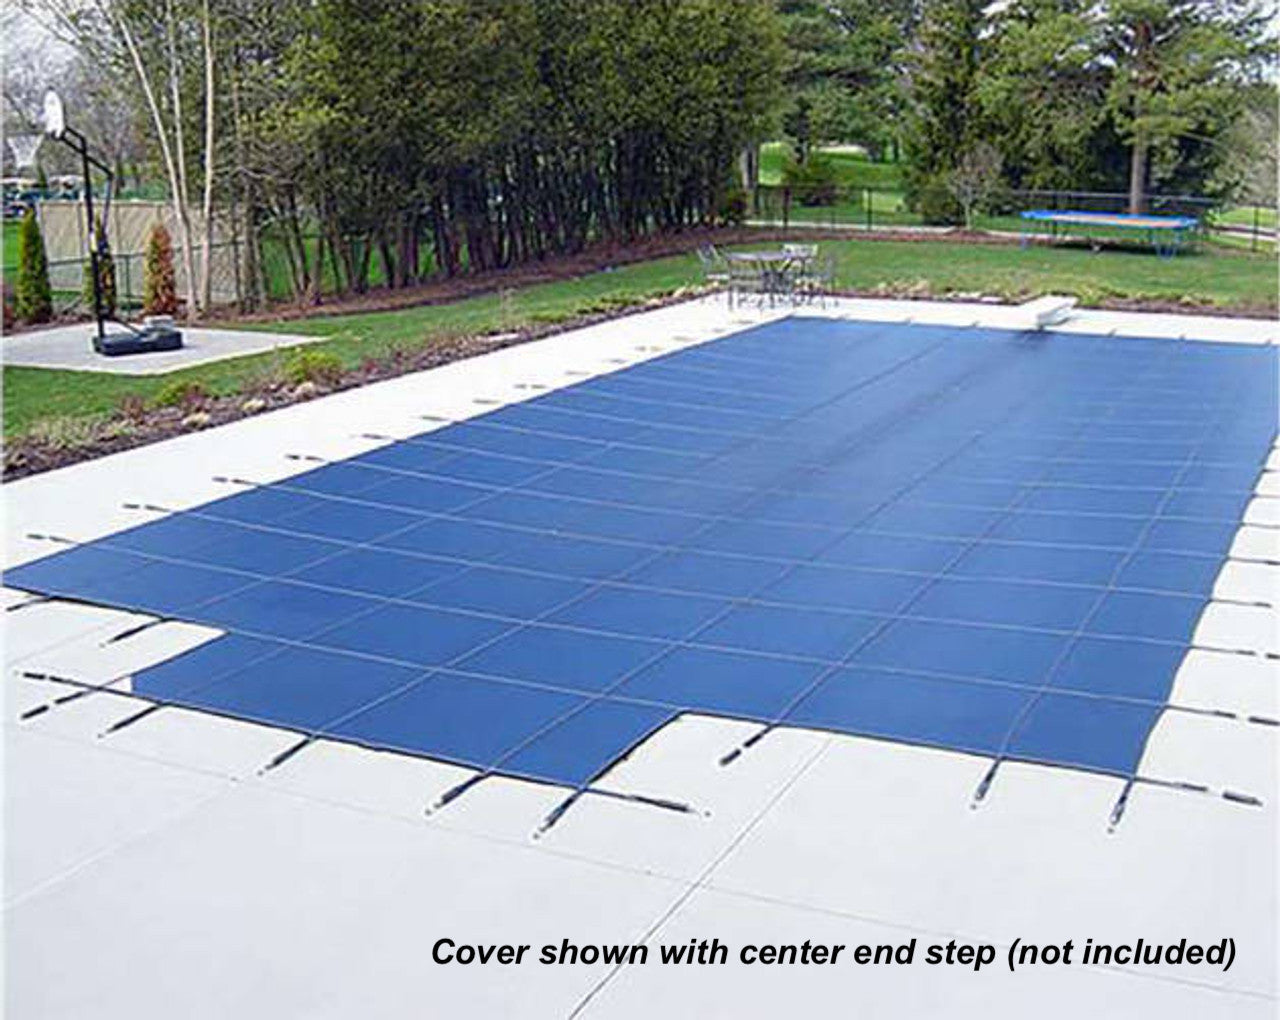 HPI 12 Year Bloc Mesh 99 Safety Cover for 12x24 ft Rectangular Pool